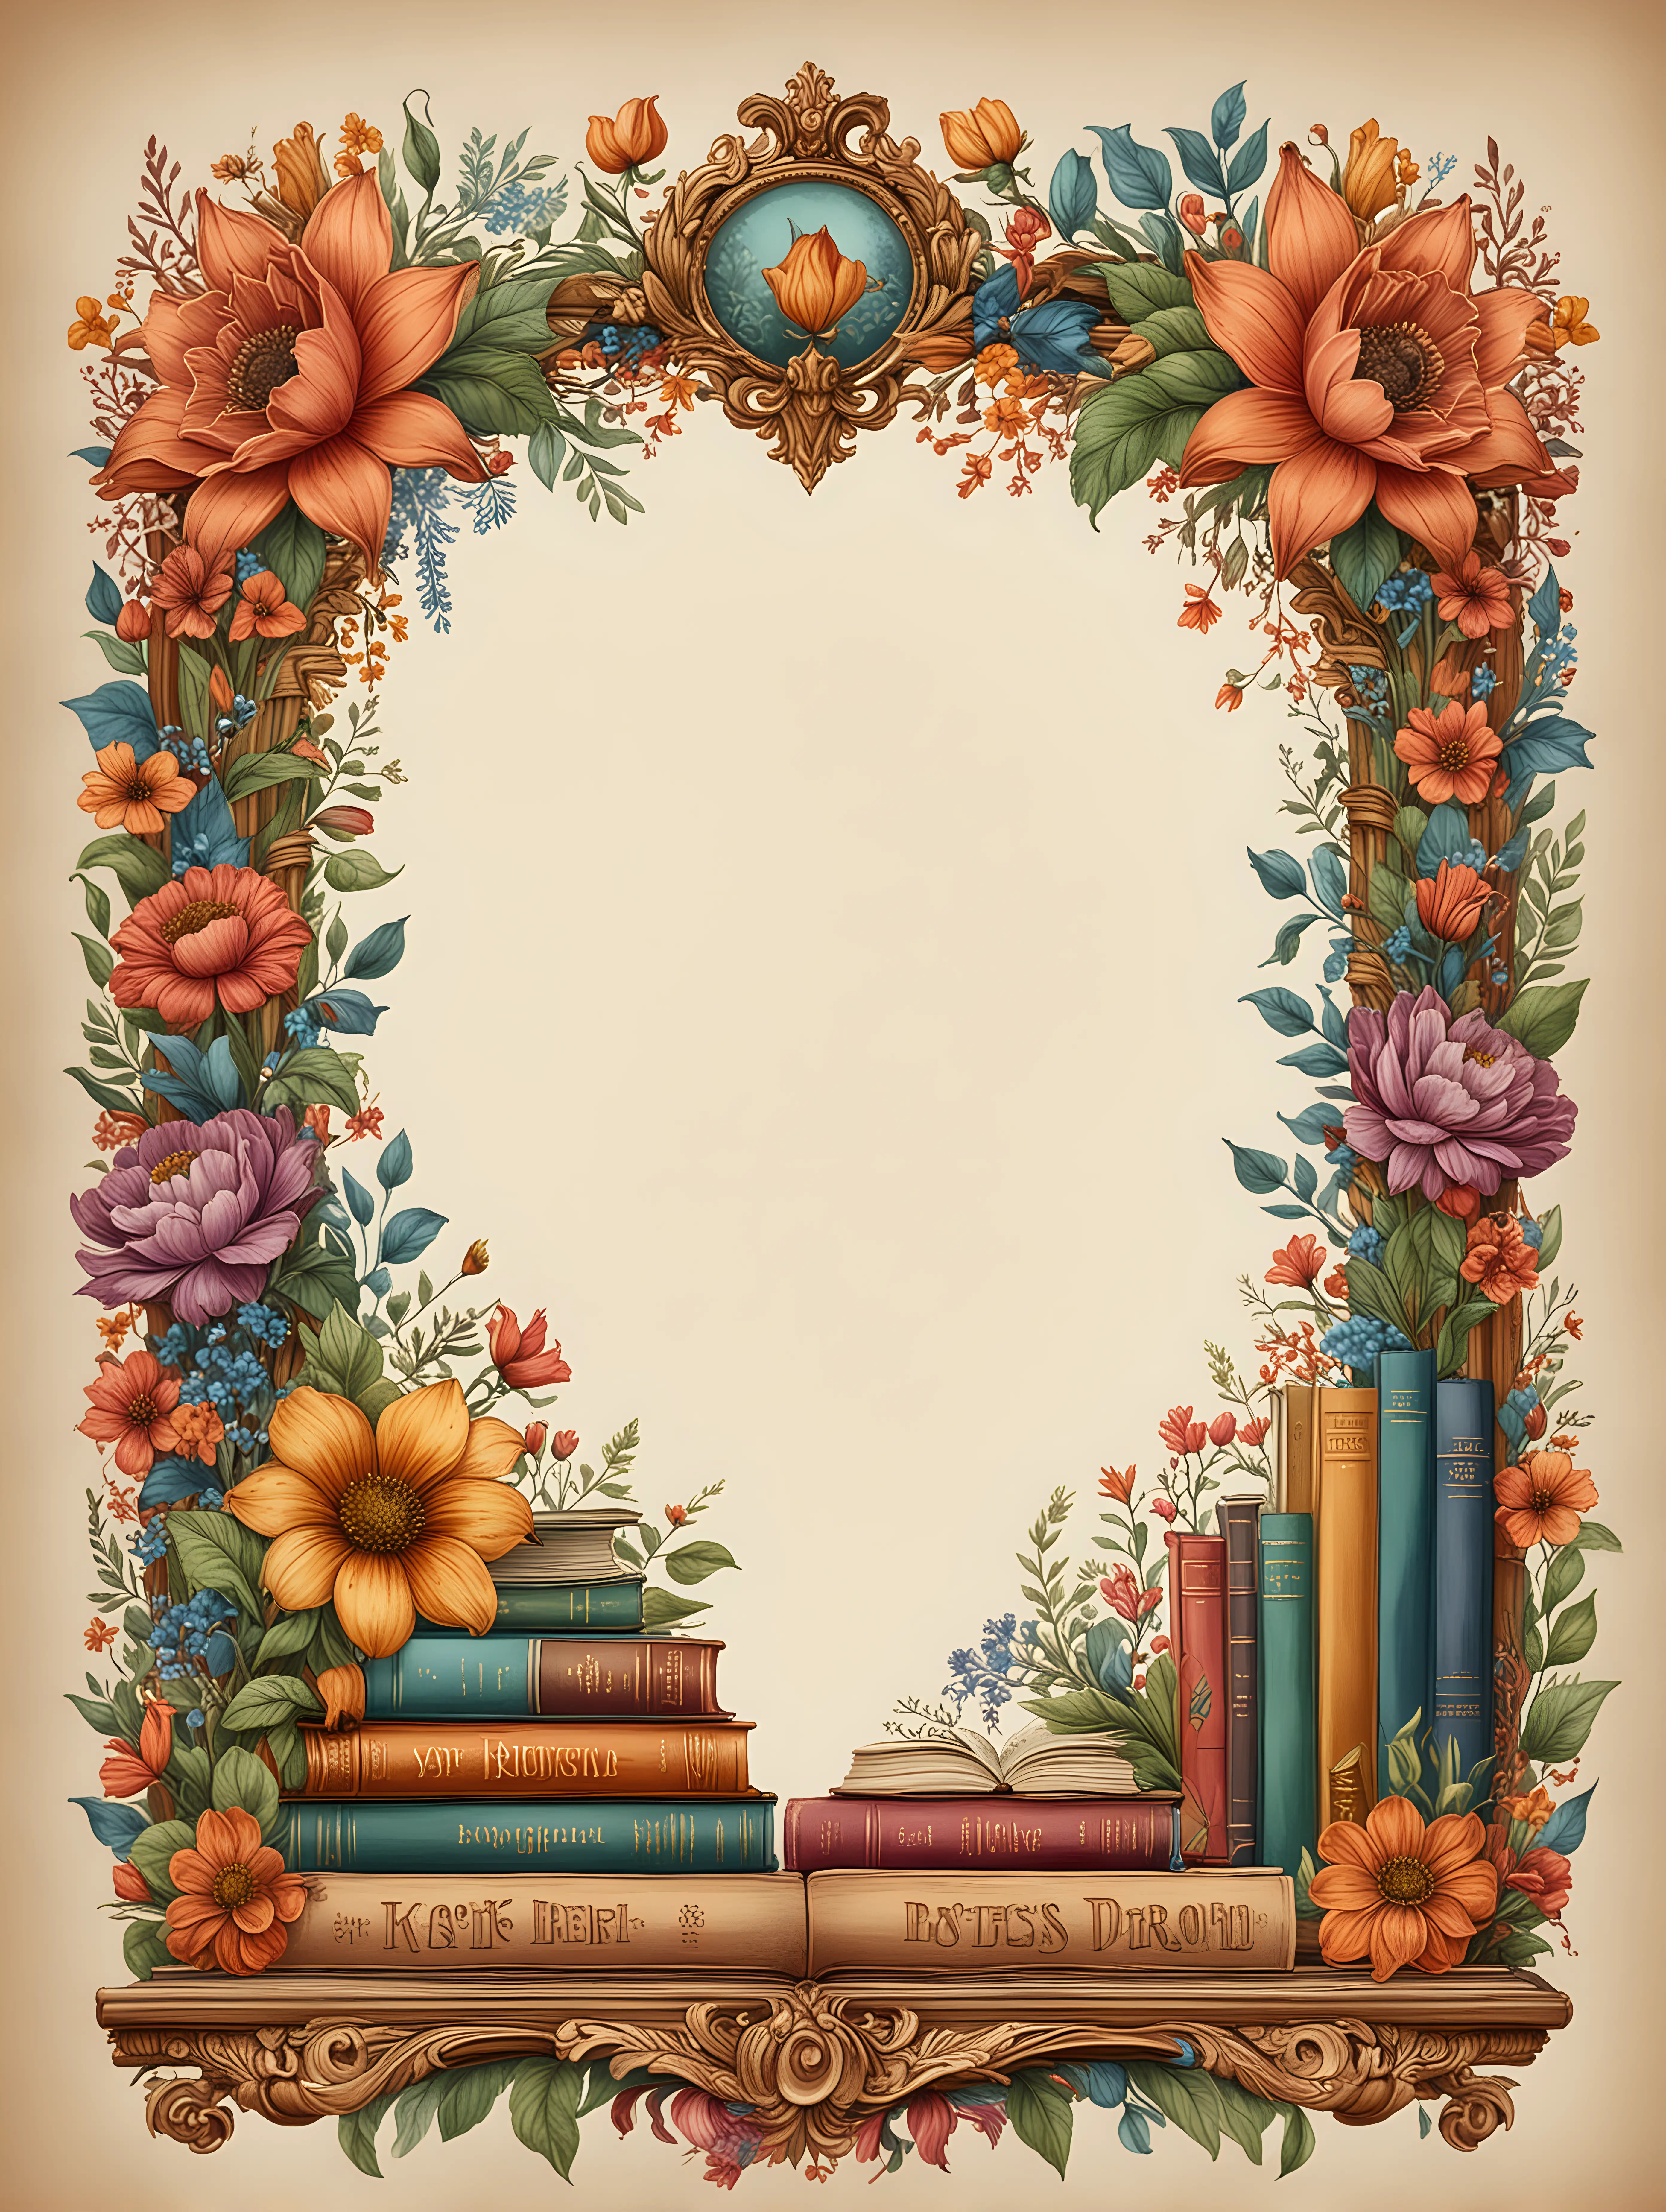 Colorful illustrated style  bookish frame with books, floral and royal accents